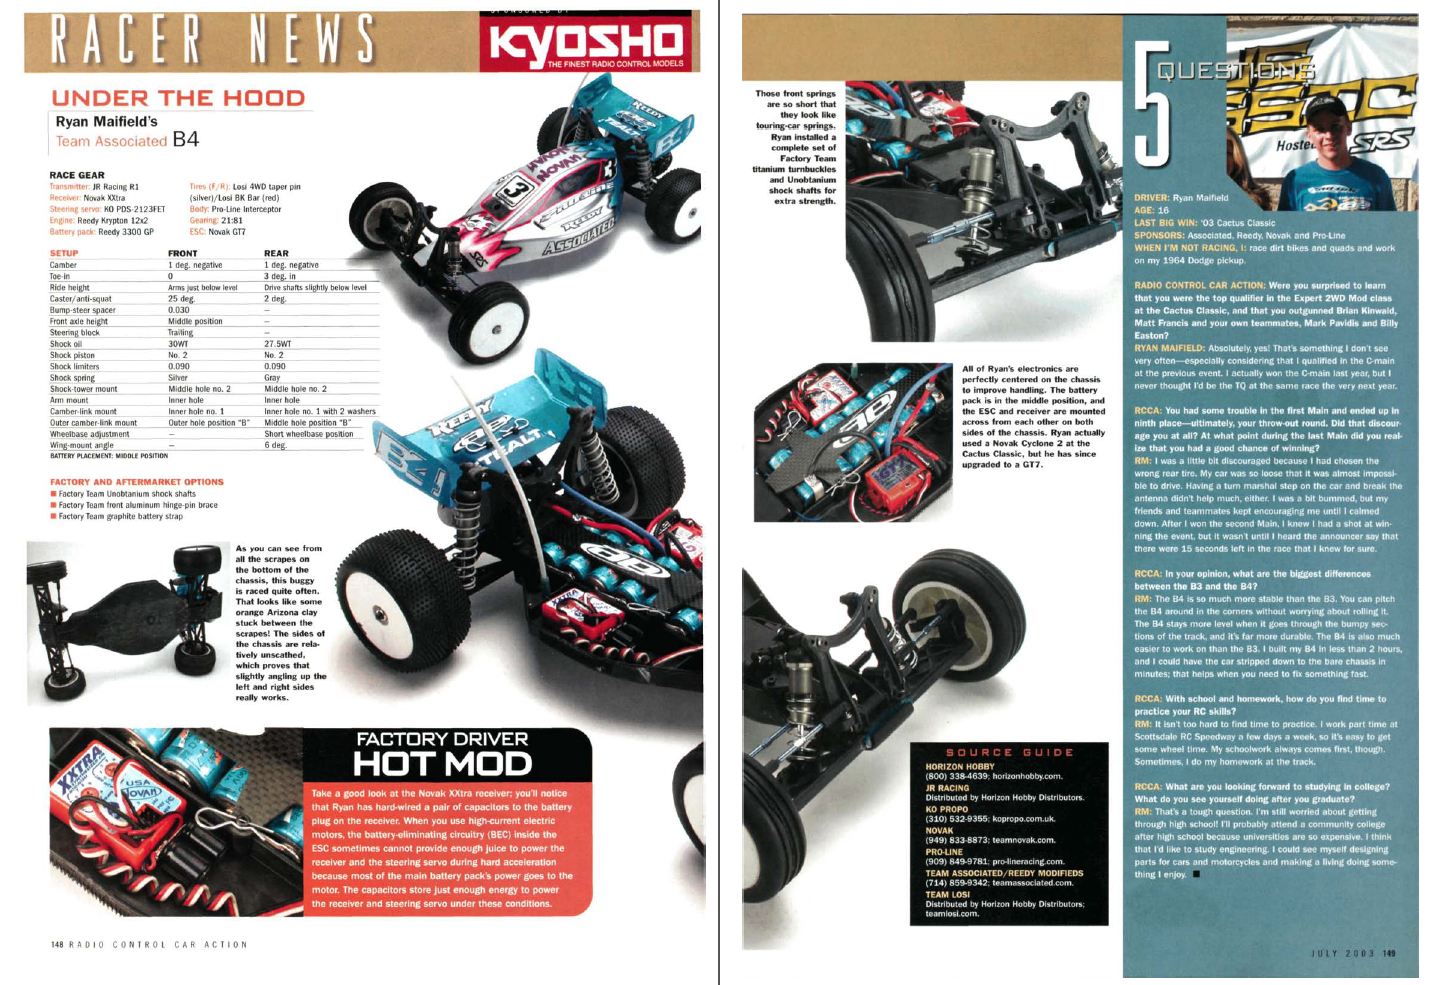 #TBT "Under The Hood" Reviewed in July 2003 Issue